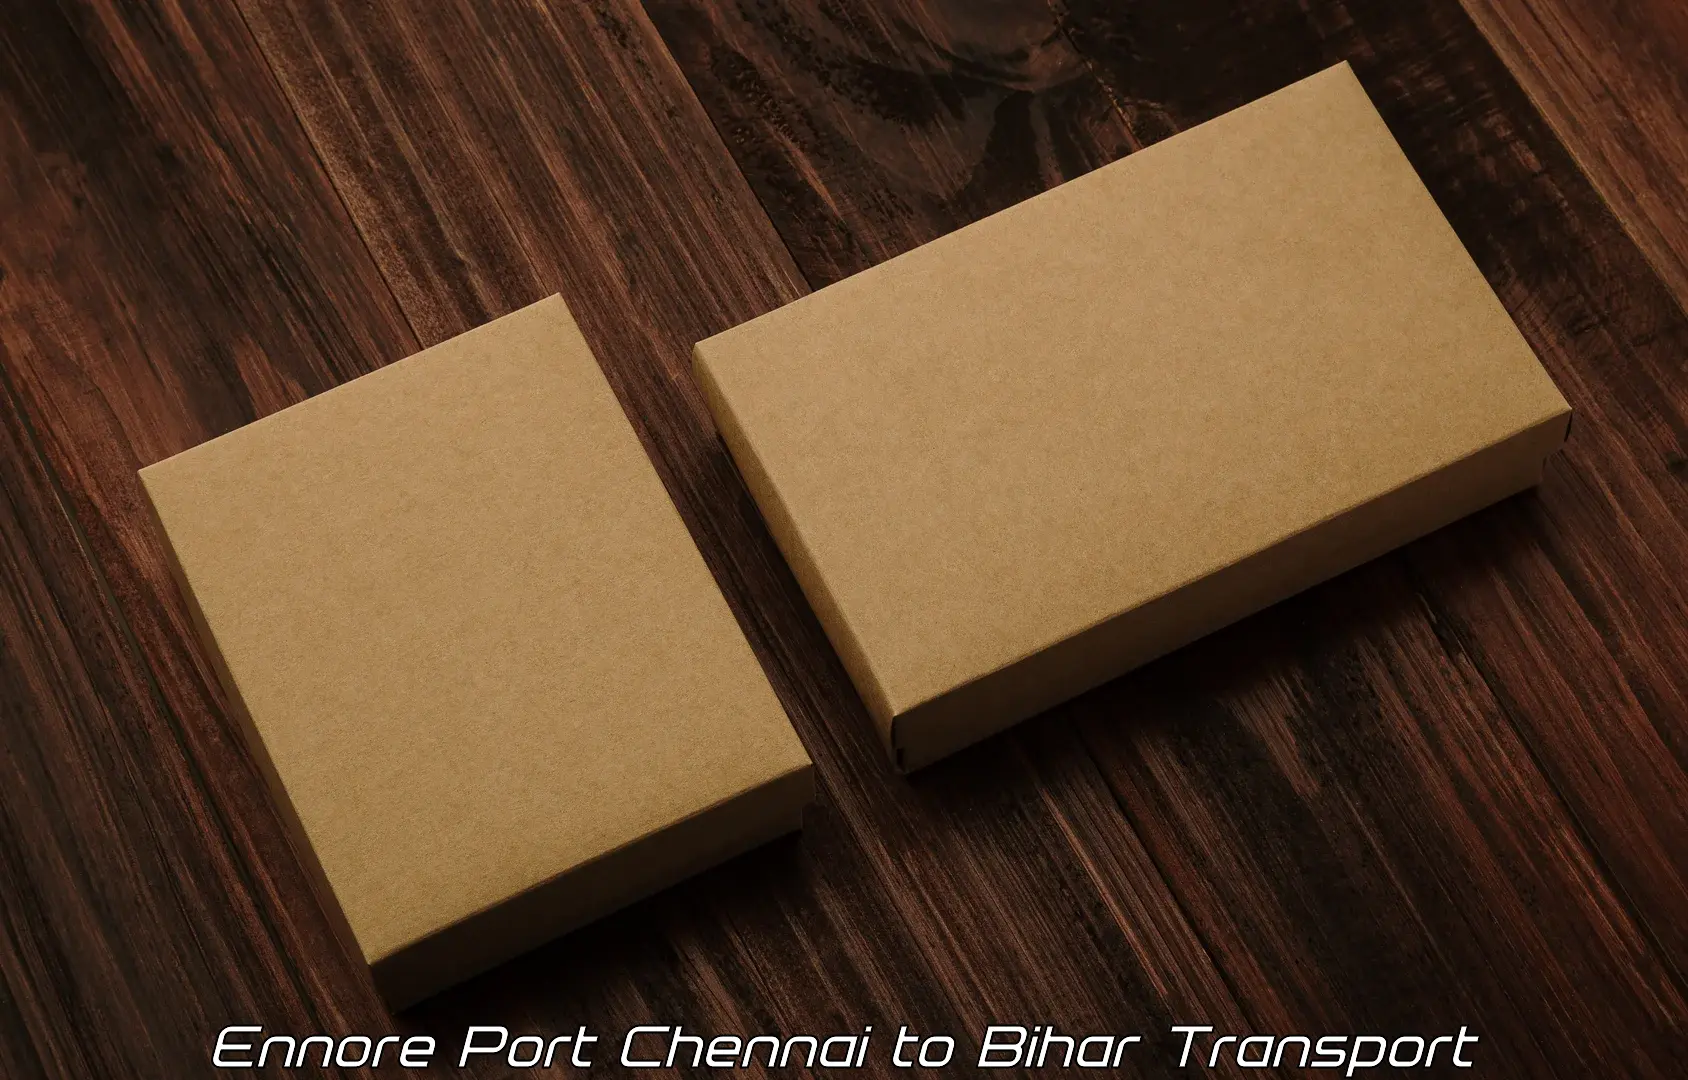 Part load transport service in India Ennore Port Chennai to Chakai